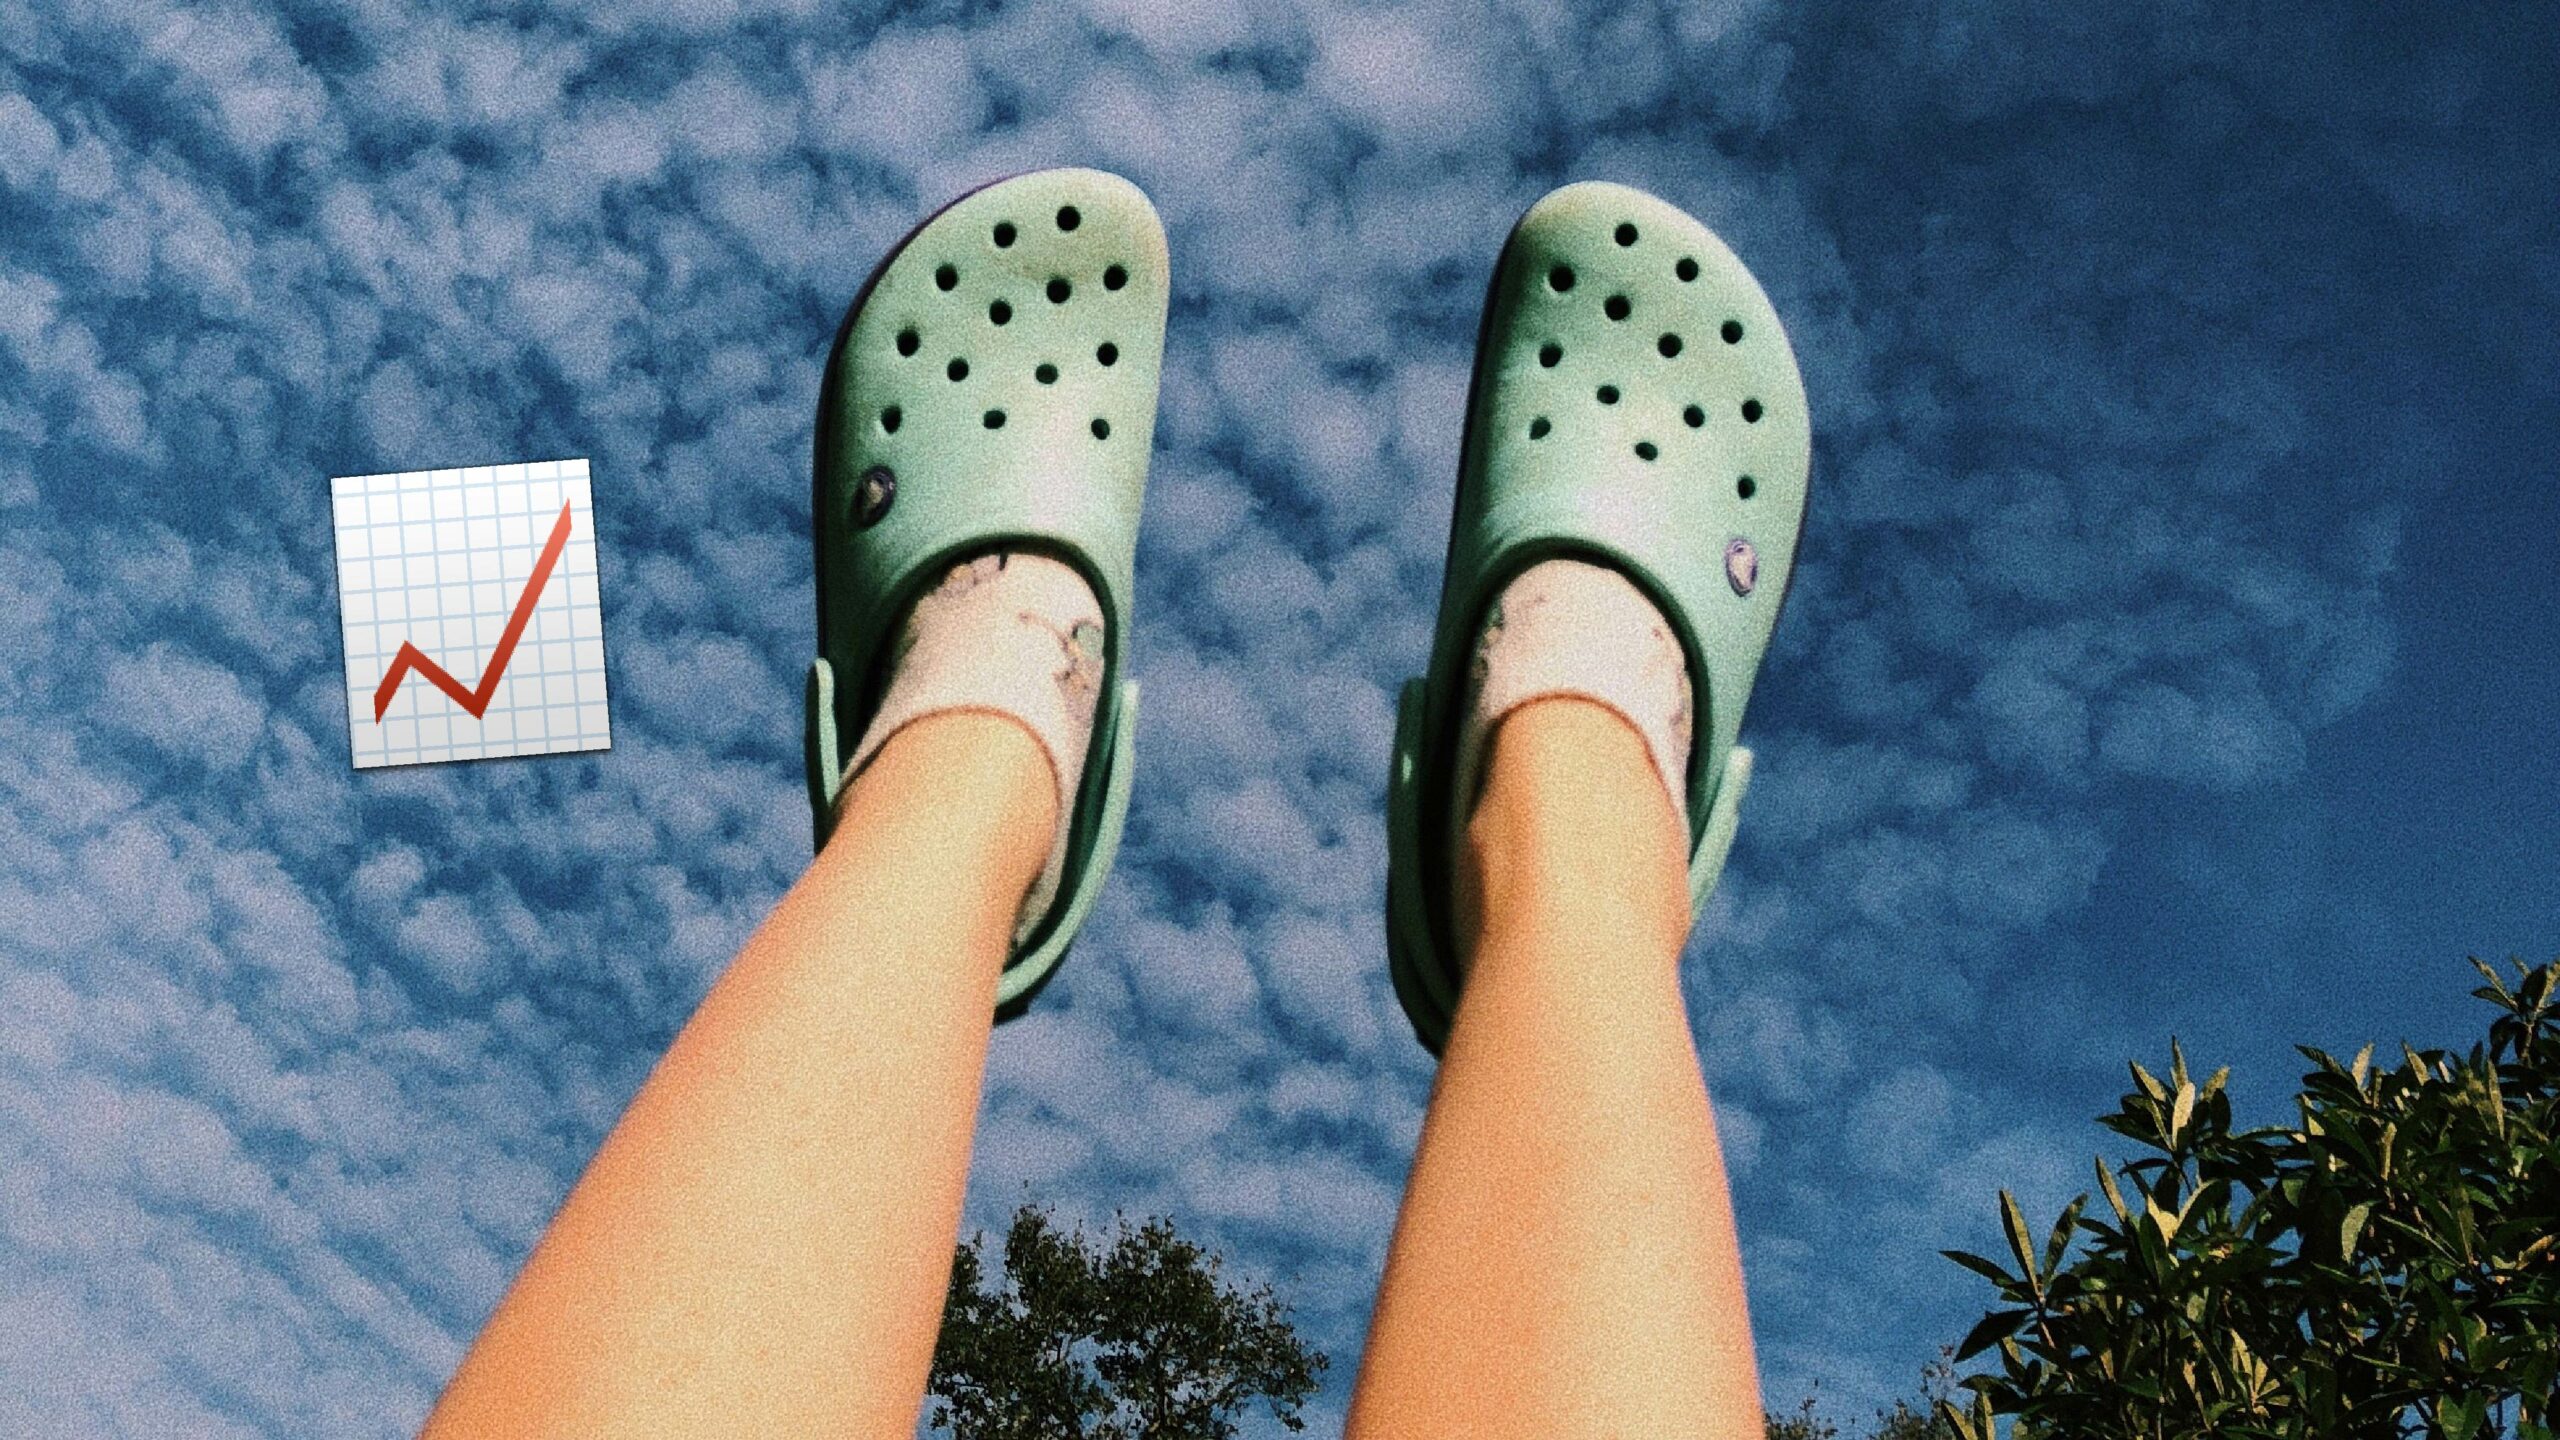 Crocs shares soar to an all-time high during the COVID-19 pandemic